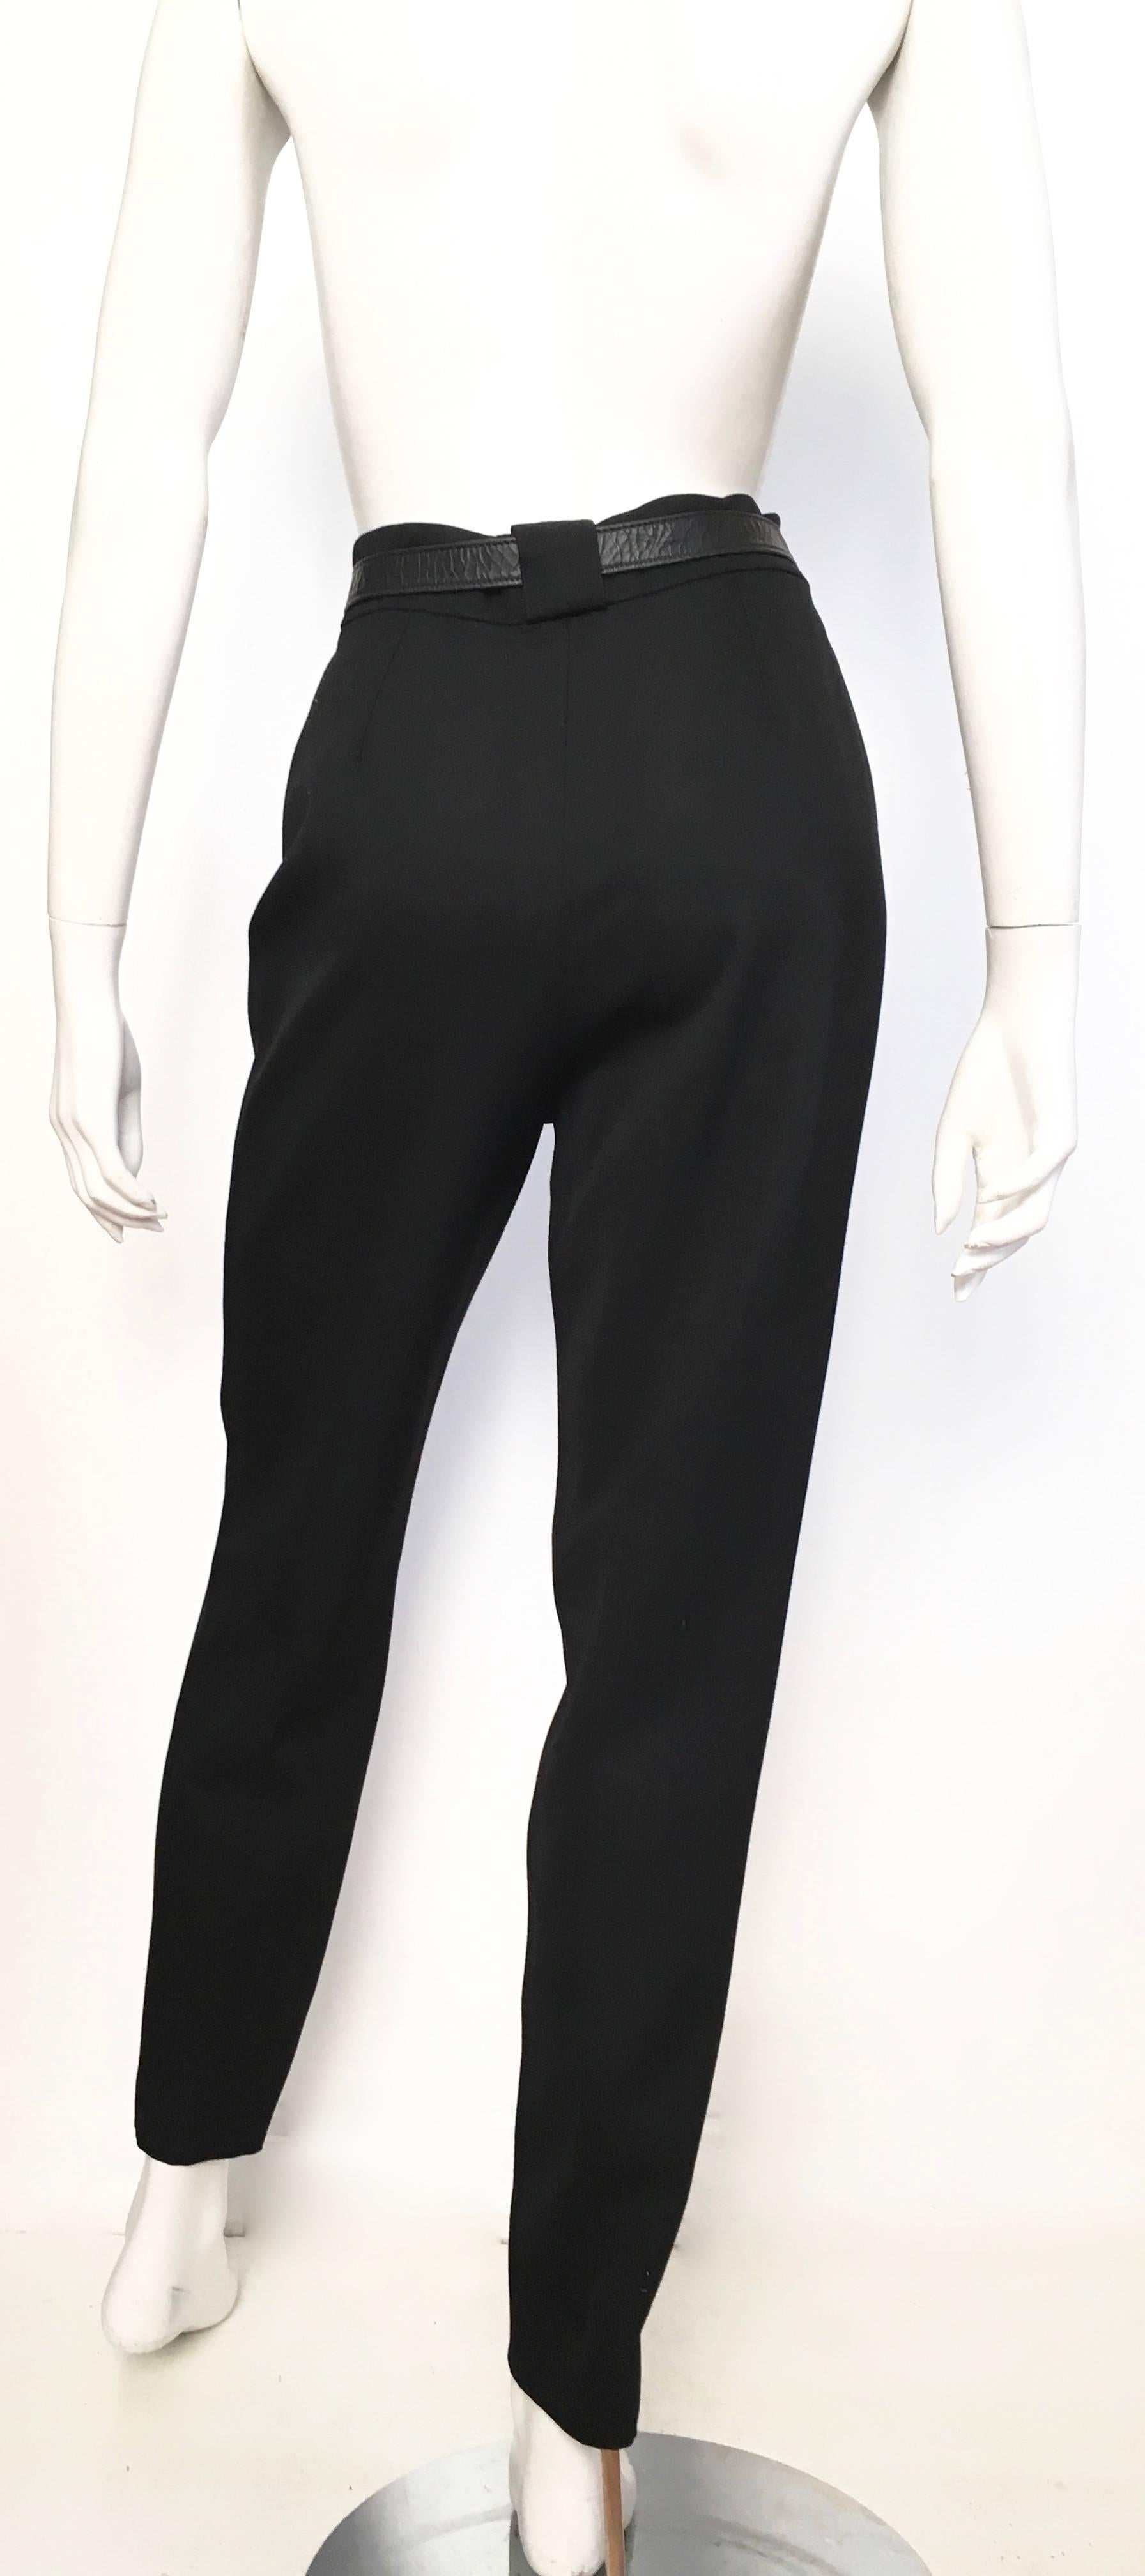 Karl Lagerfeld 1980s Black Wool Pleated Pants Size 4/6. For Sale 3